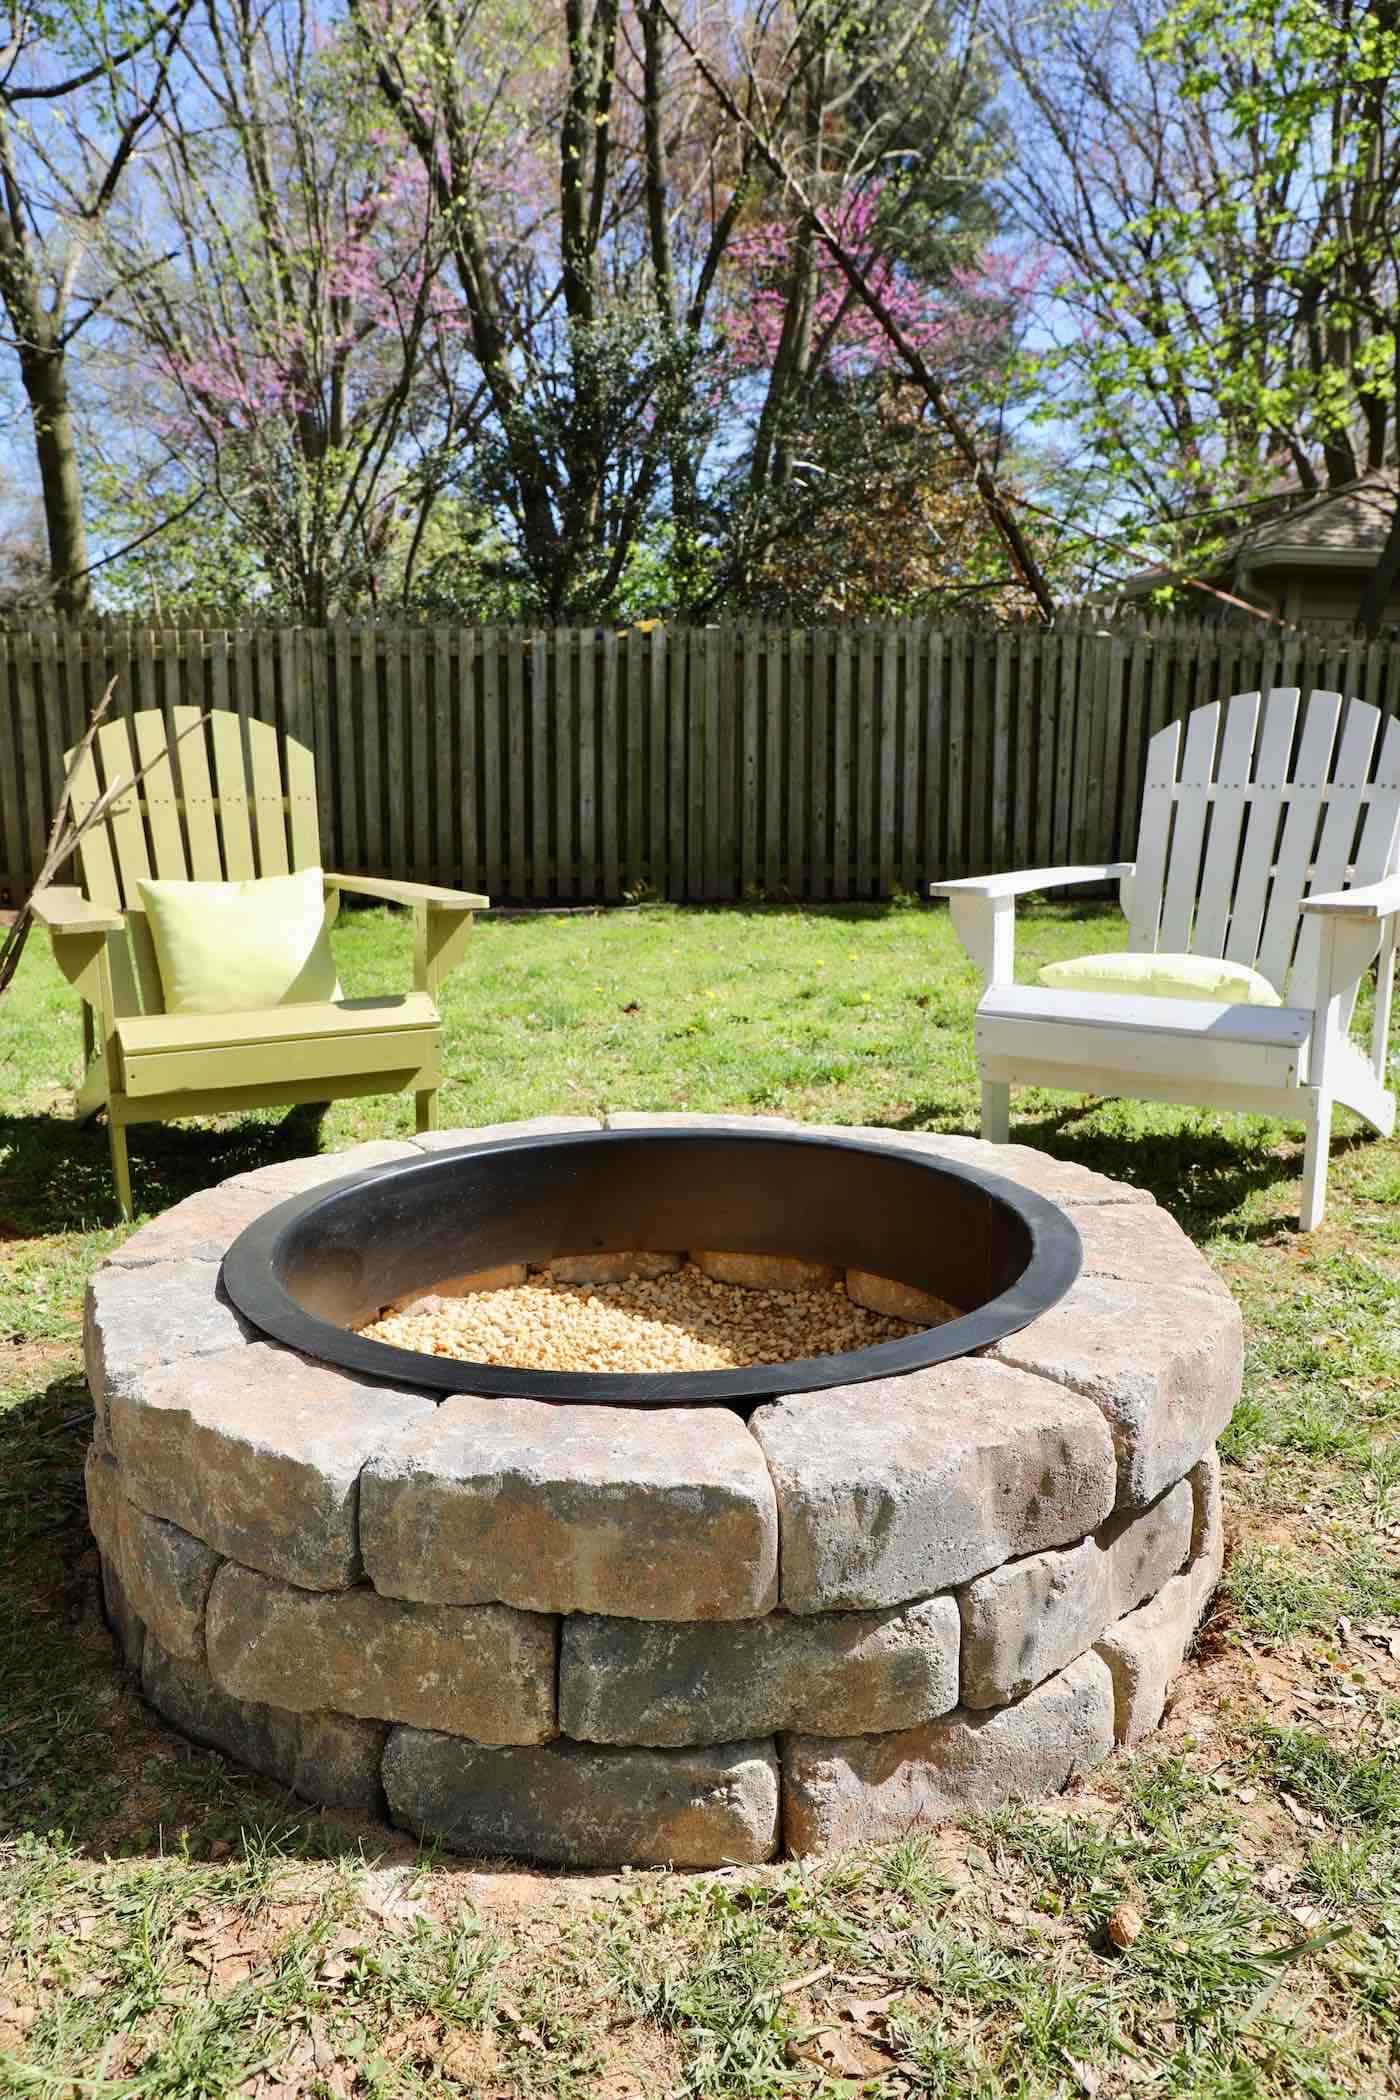 Diy Fire Pit With Gravel Stones, Outdoor Fire Pit Construction